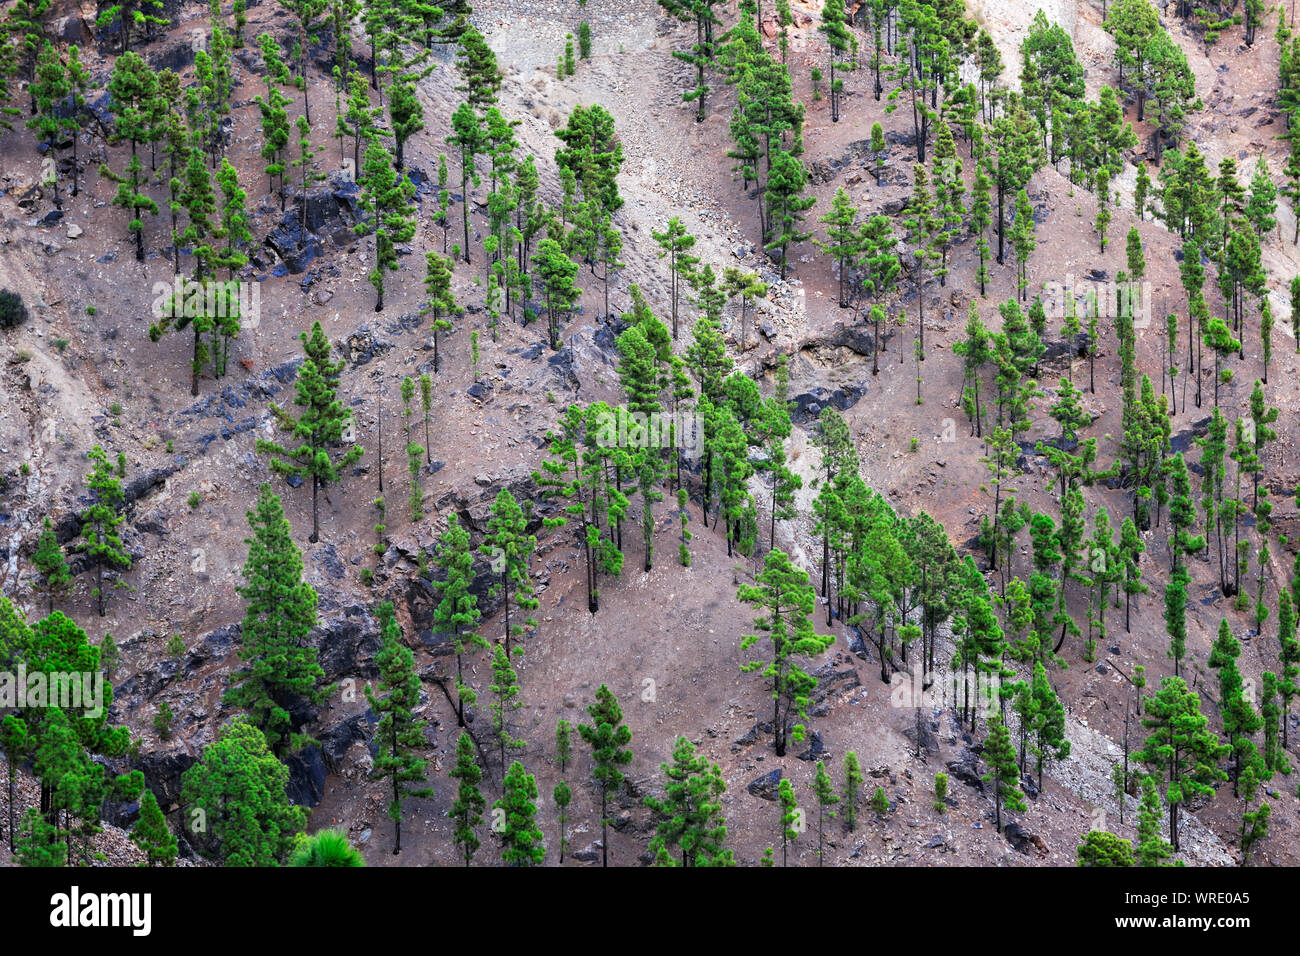 Canary island Pine trees (Pinus canariensis) growing in volcanic ashes. Gran Canaria, Canary islands. Spain Stock Photo